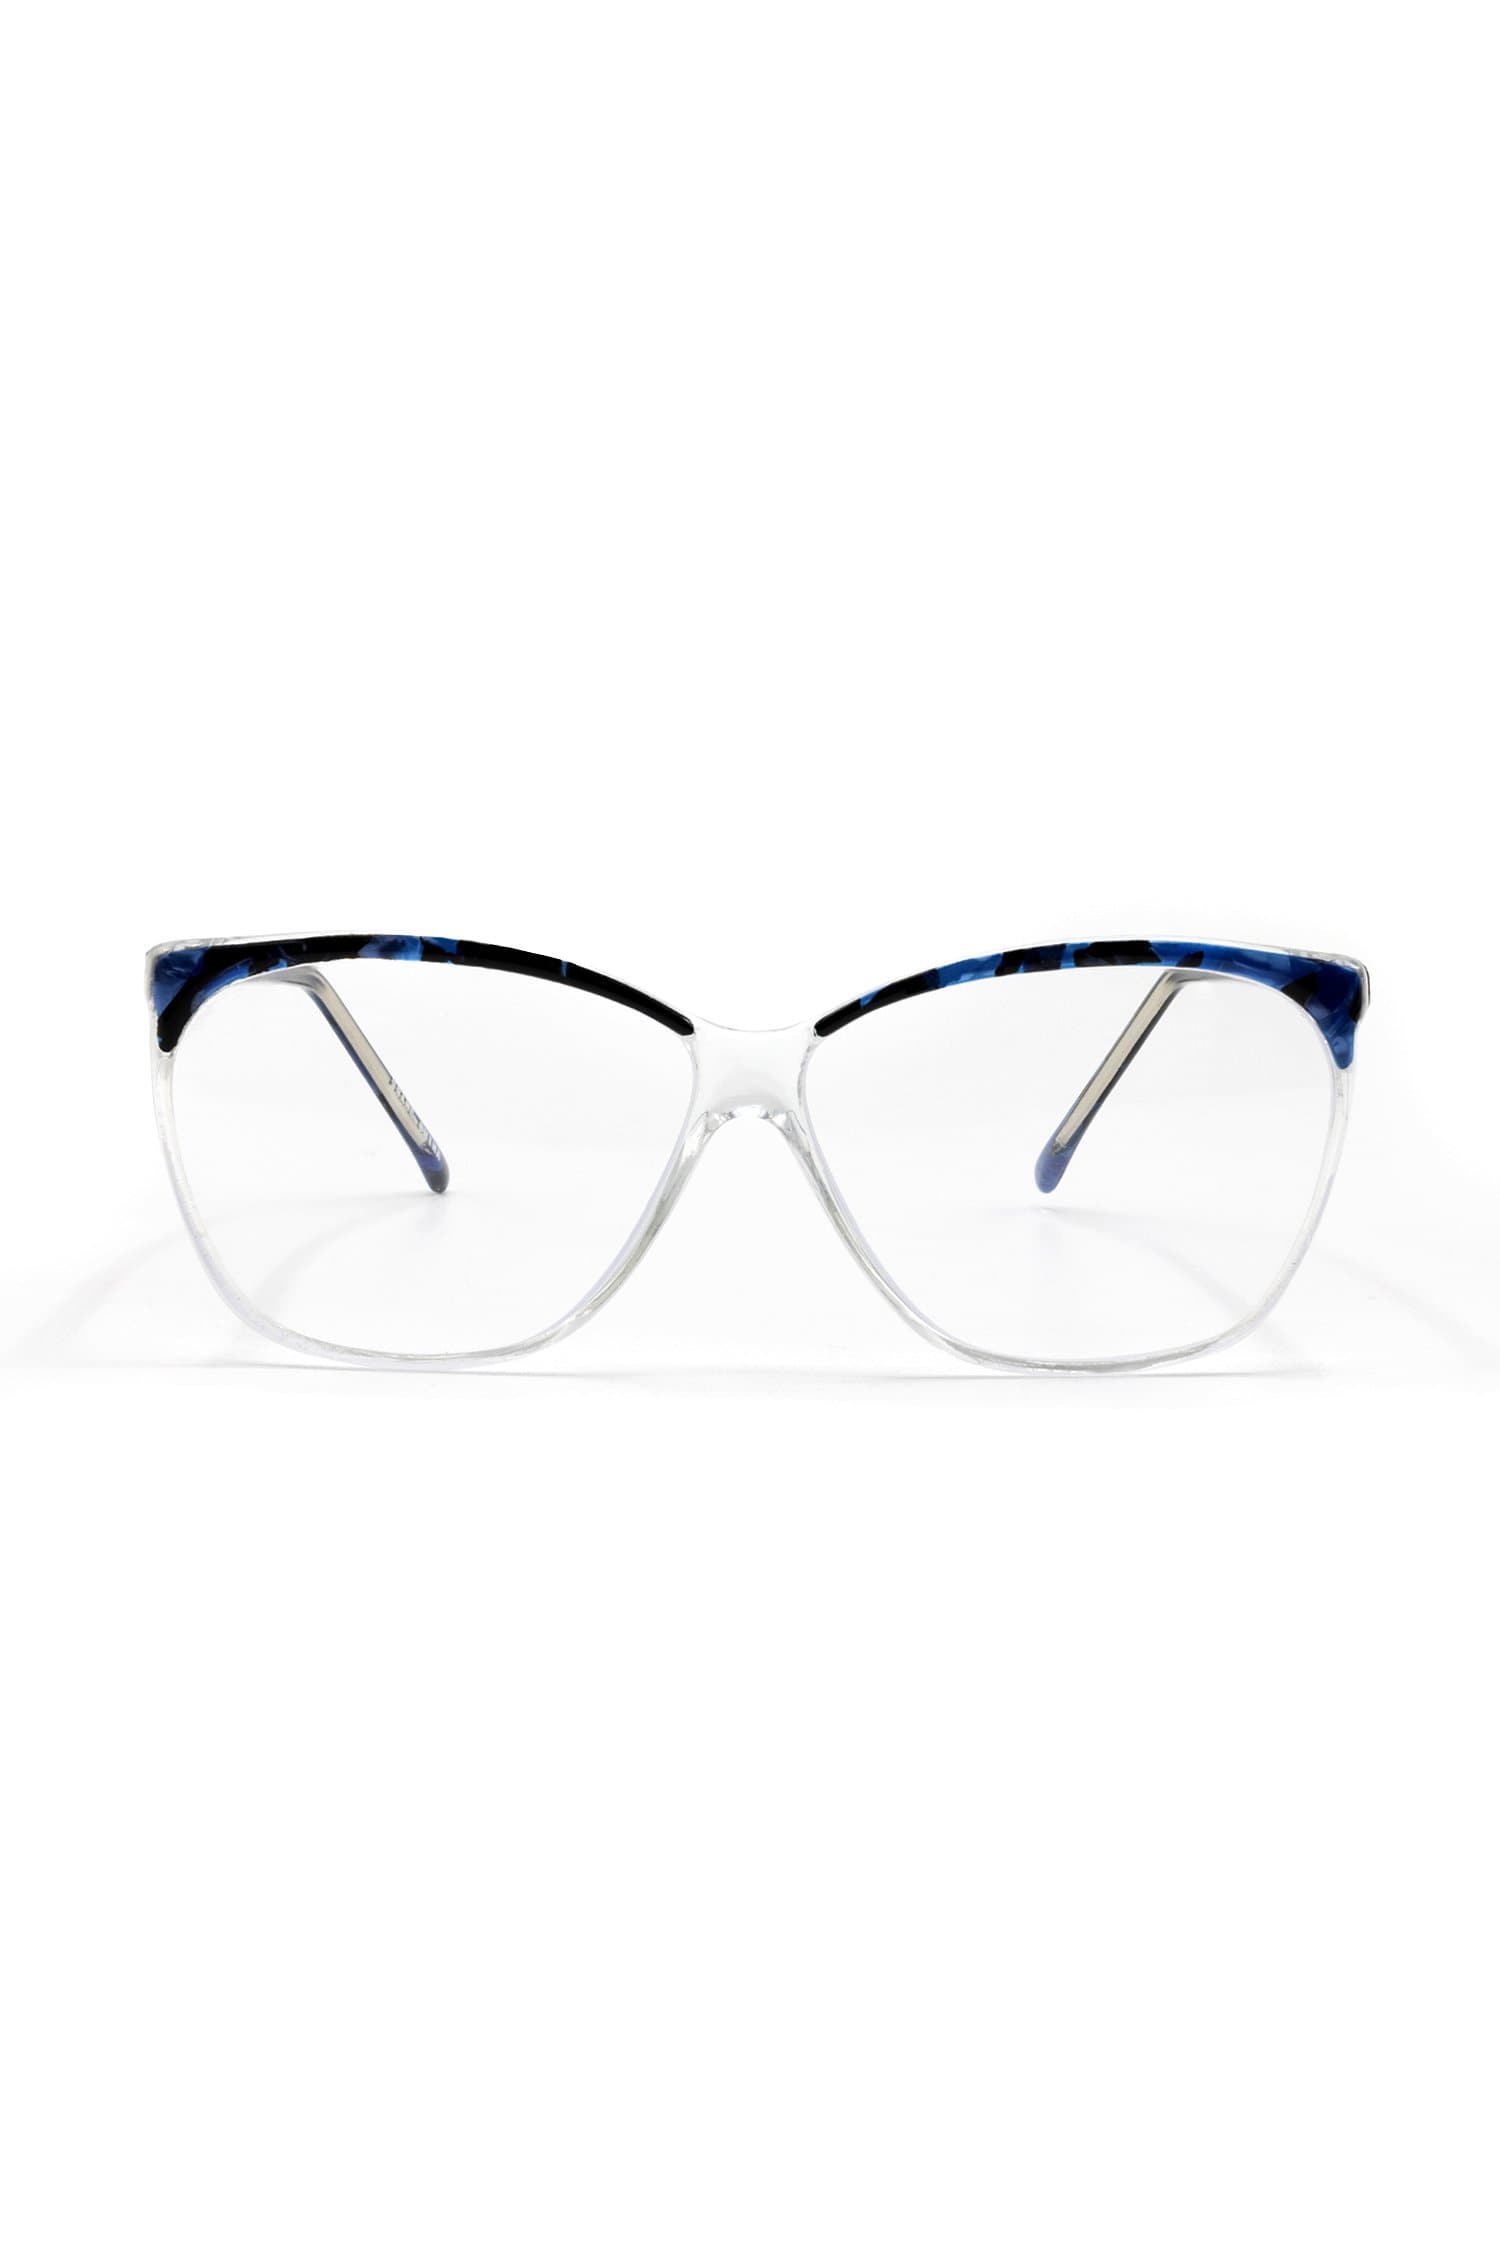 Los Angeles Apparel | Fenal Glasses for Women in Blue Marble